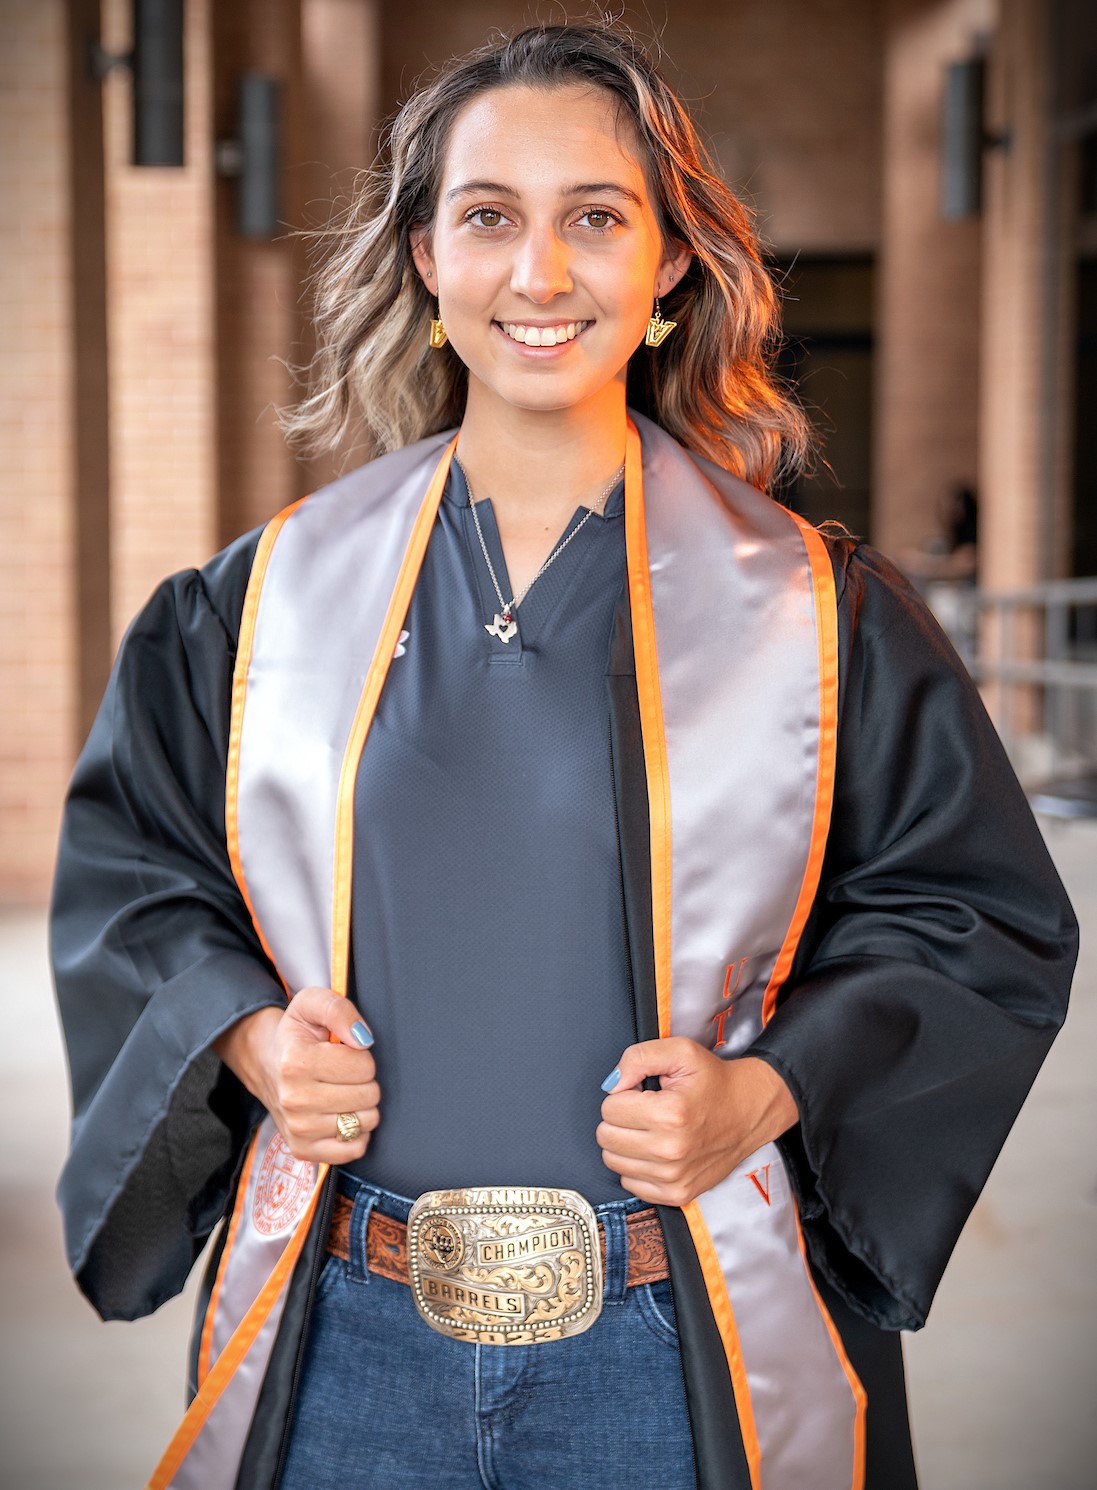 utrgv claire lee graduating during fall commencement